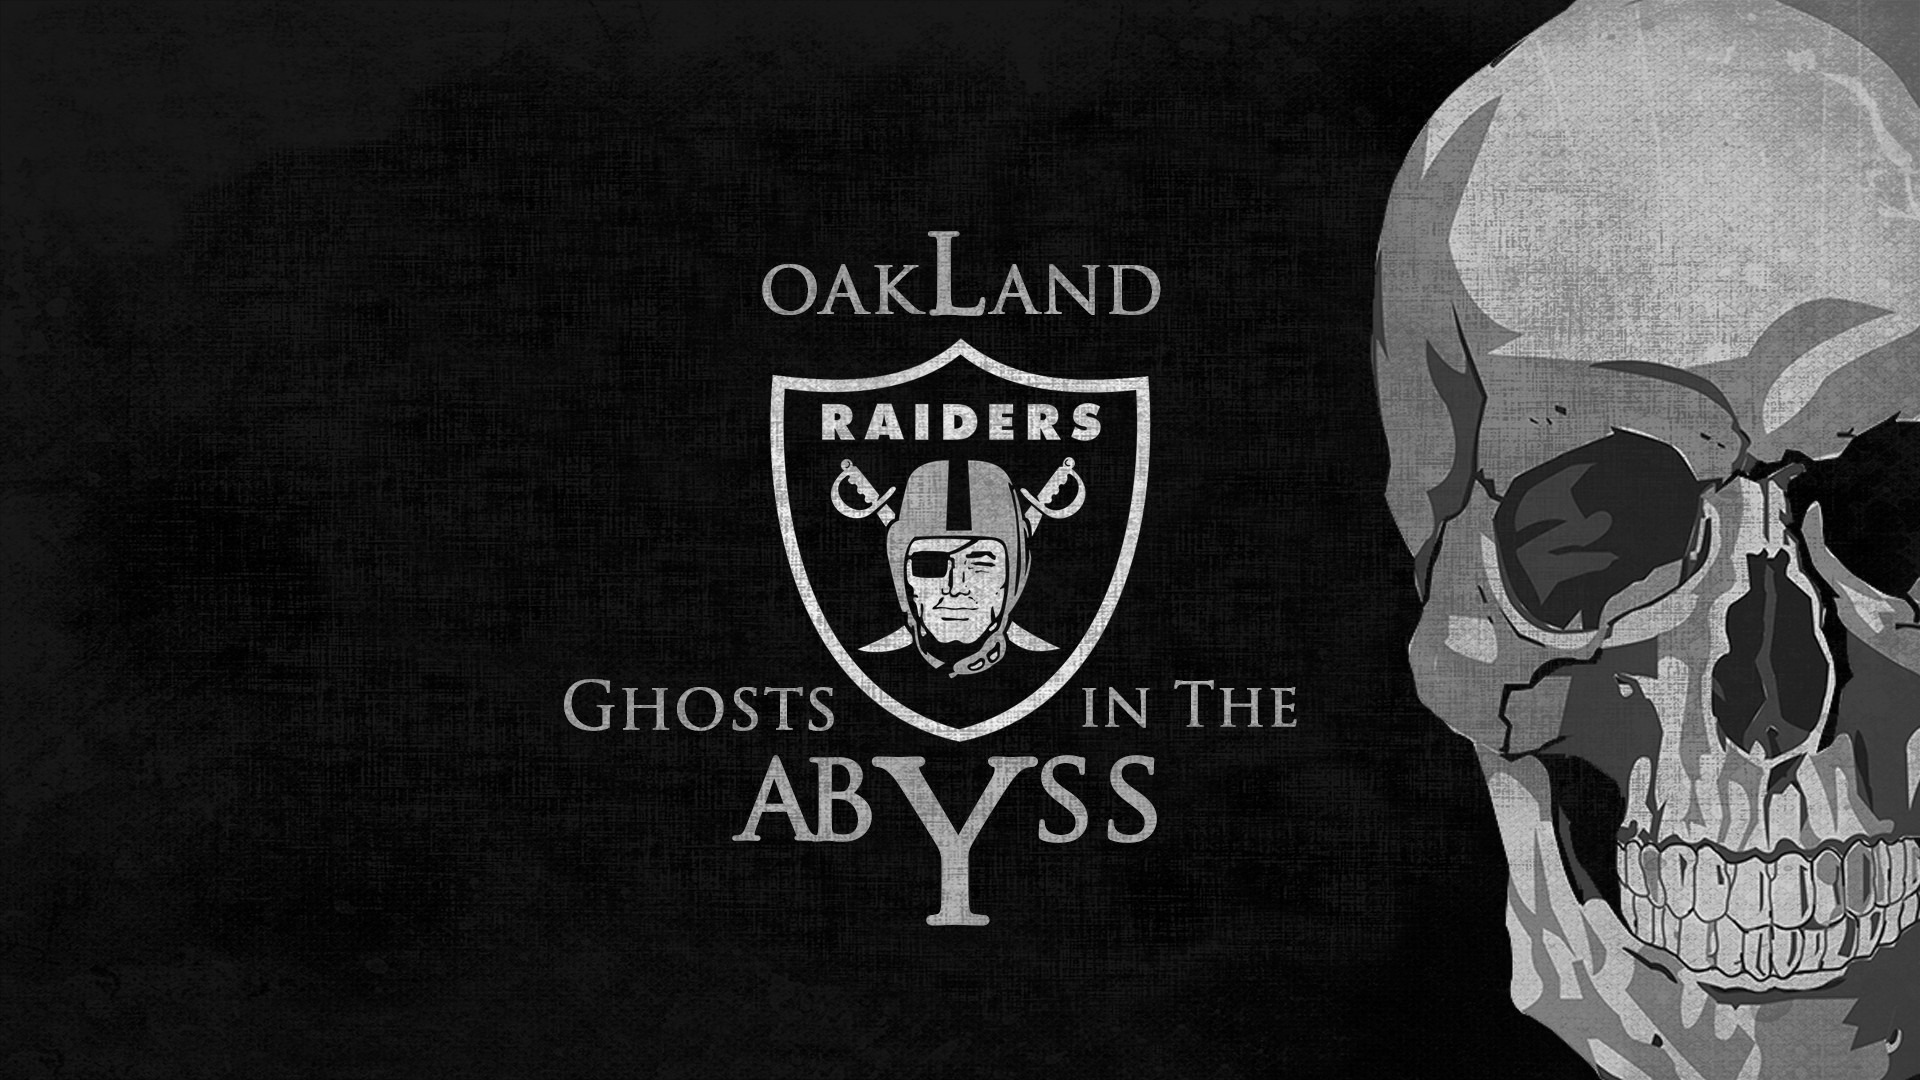 Oakland Raiders NFL Wallpaper With high-resolution 1920X1080 pixel. You can use this wallpaper for your Mac or Windows Desktop Background, iPhone, Android or Tablet and another Smartphone device